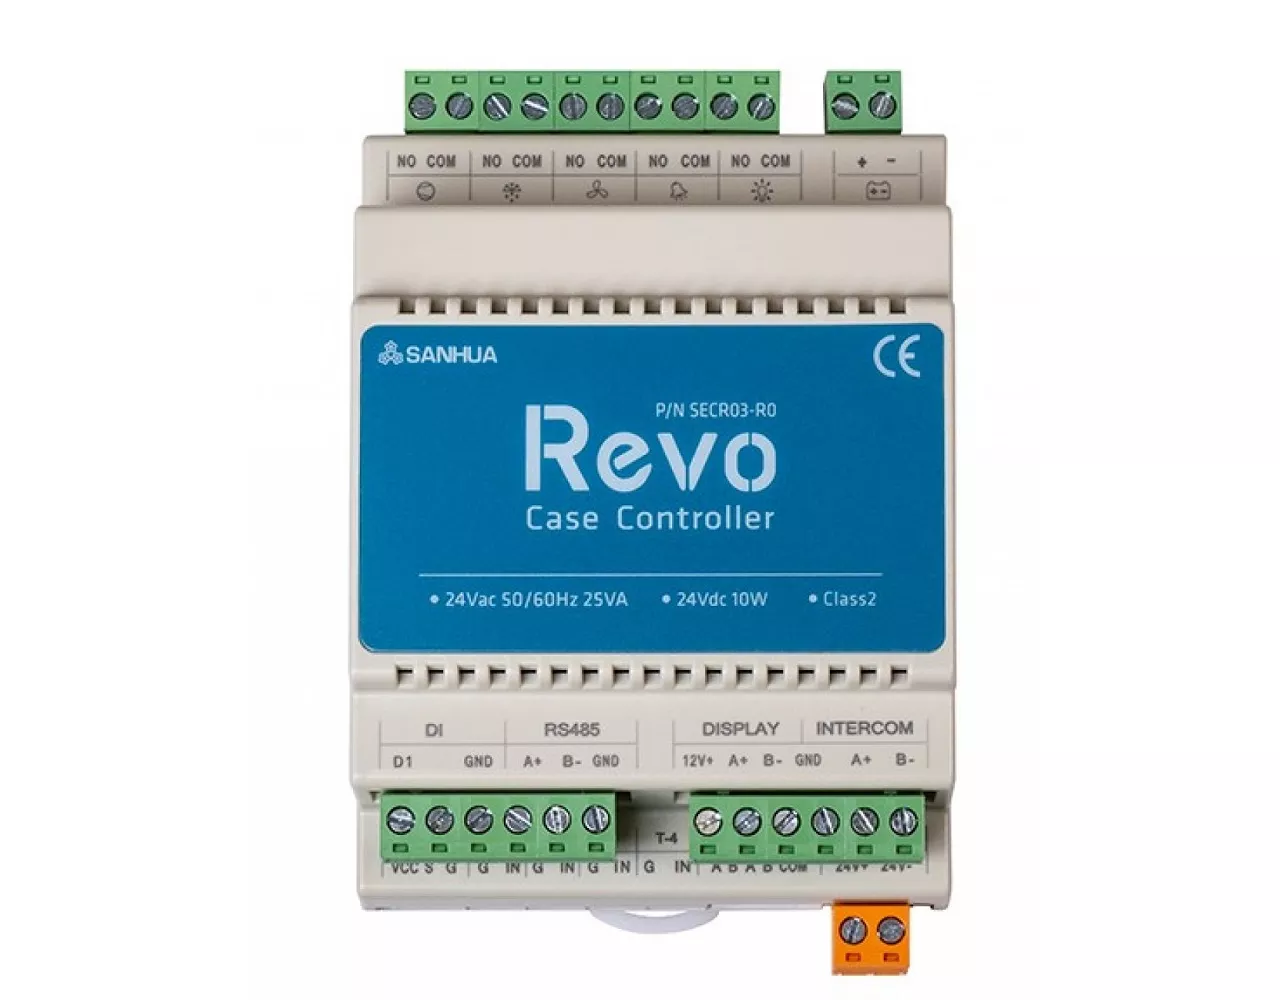 New SANHUA Refrigerated cabinet controller SEC R03 series